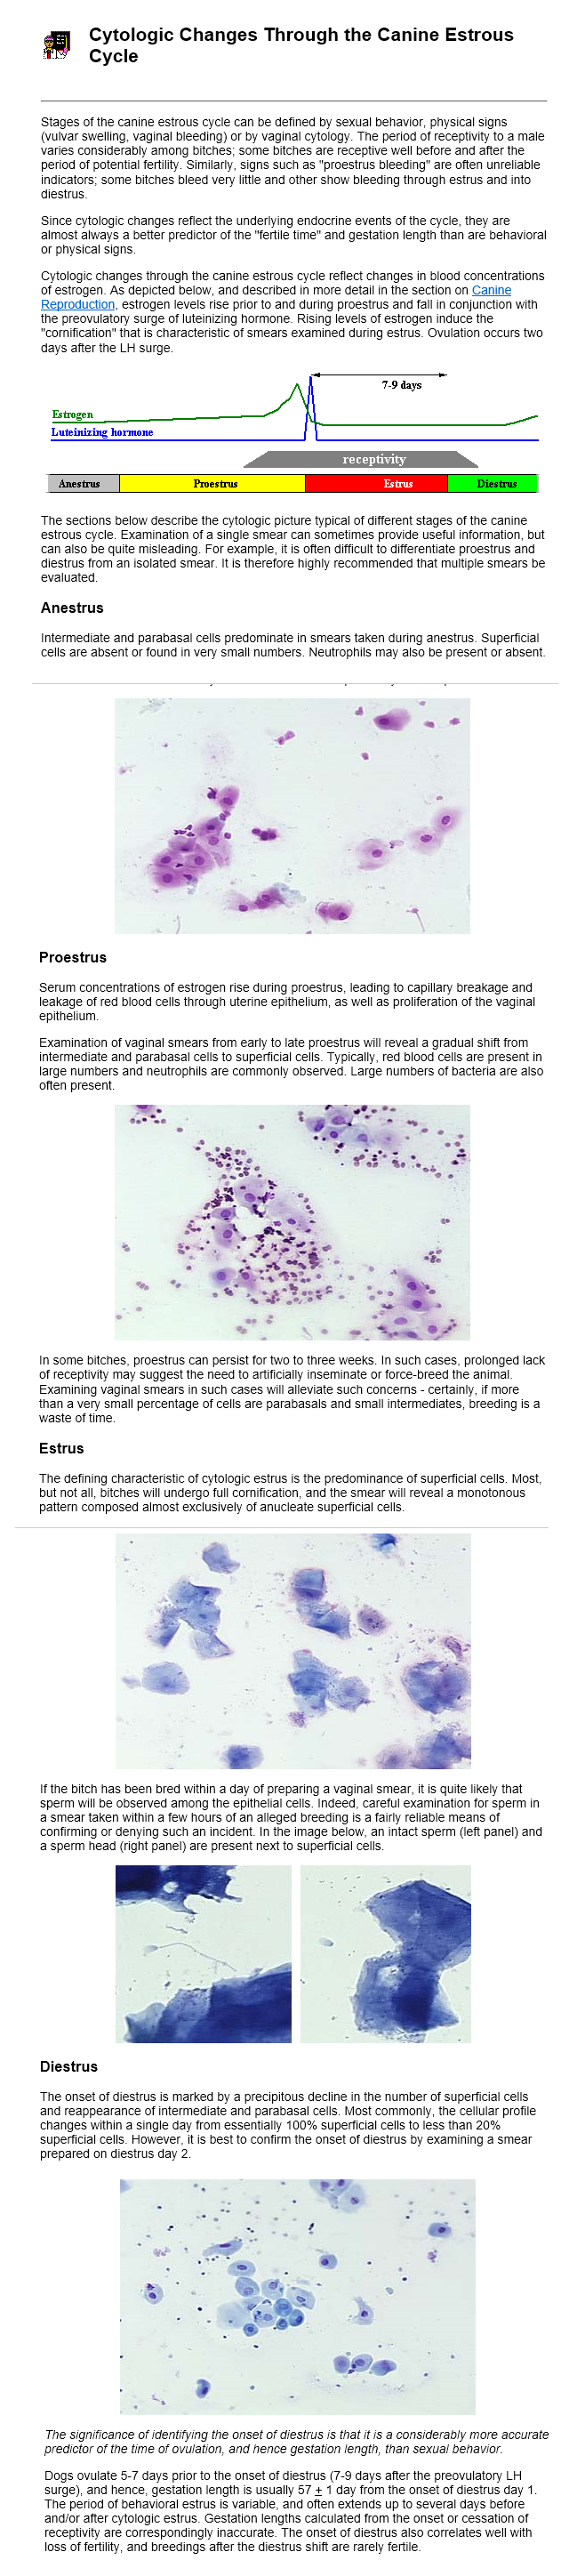 cytological changes